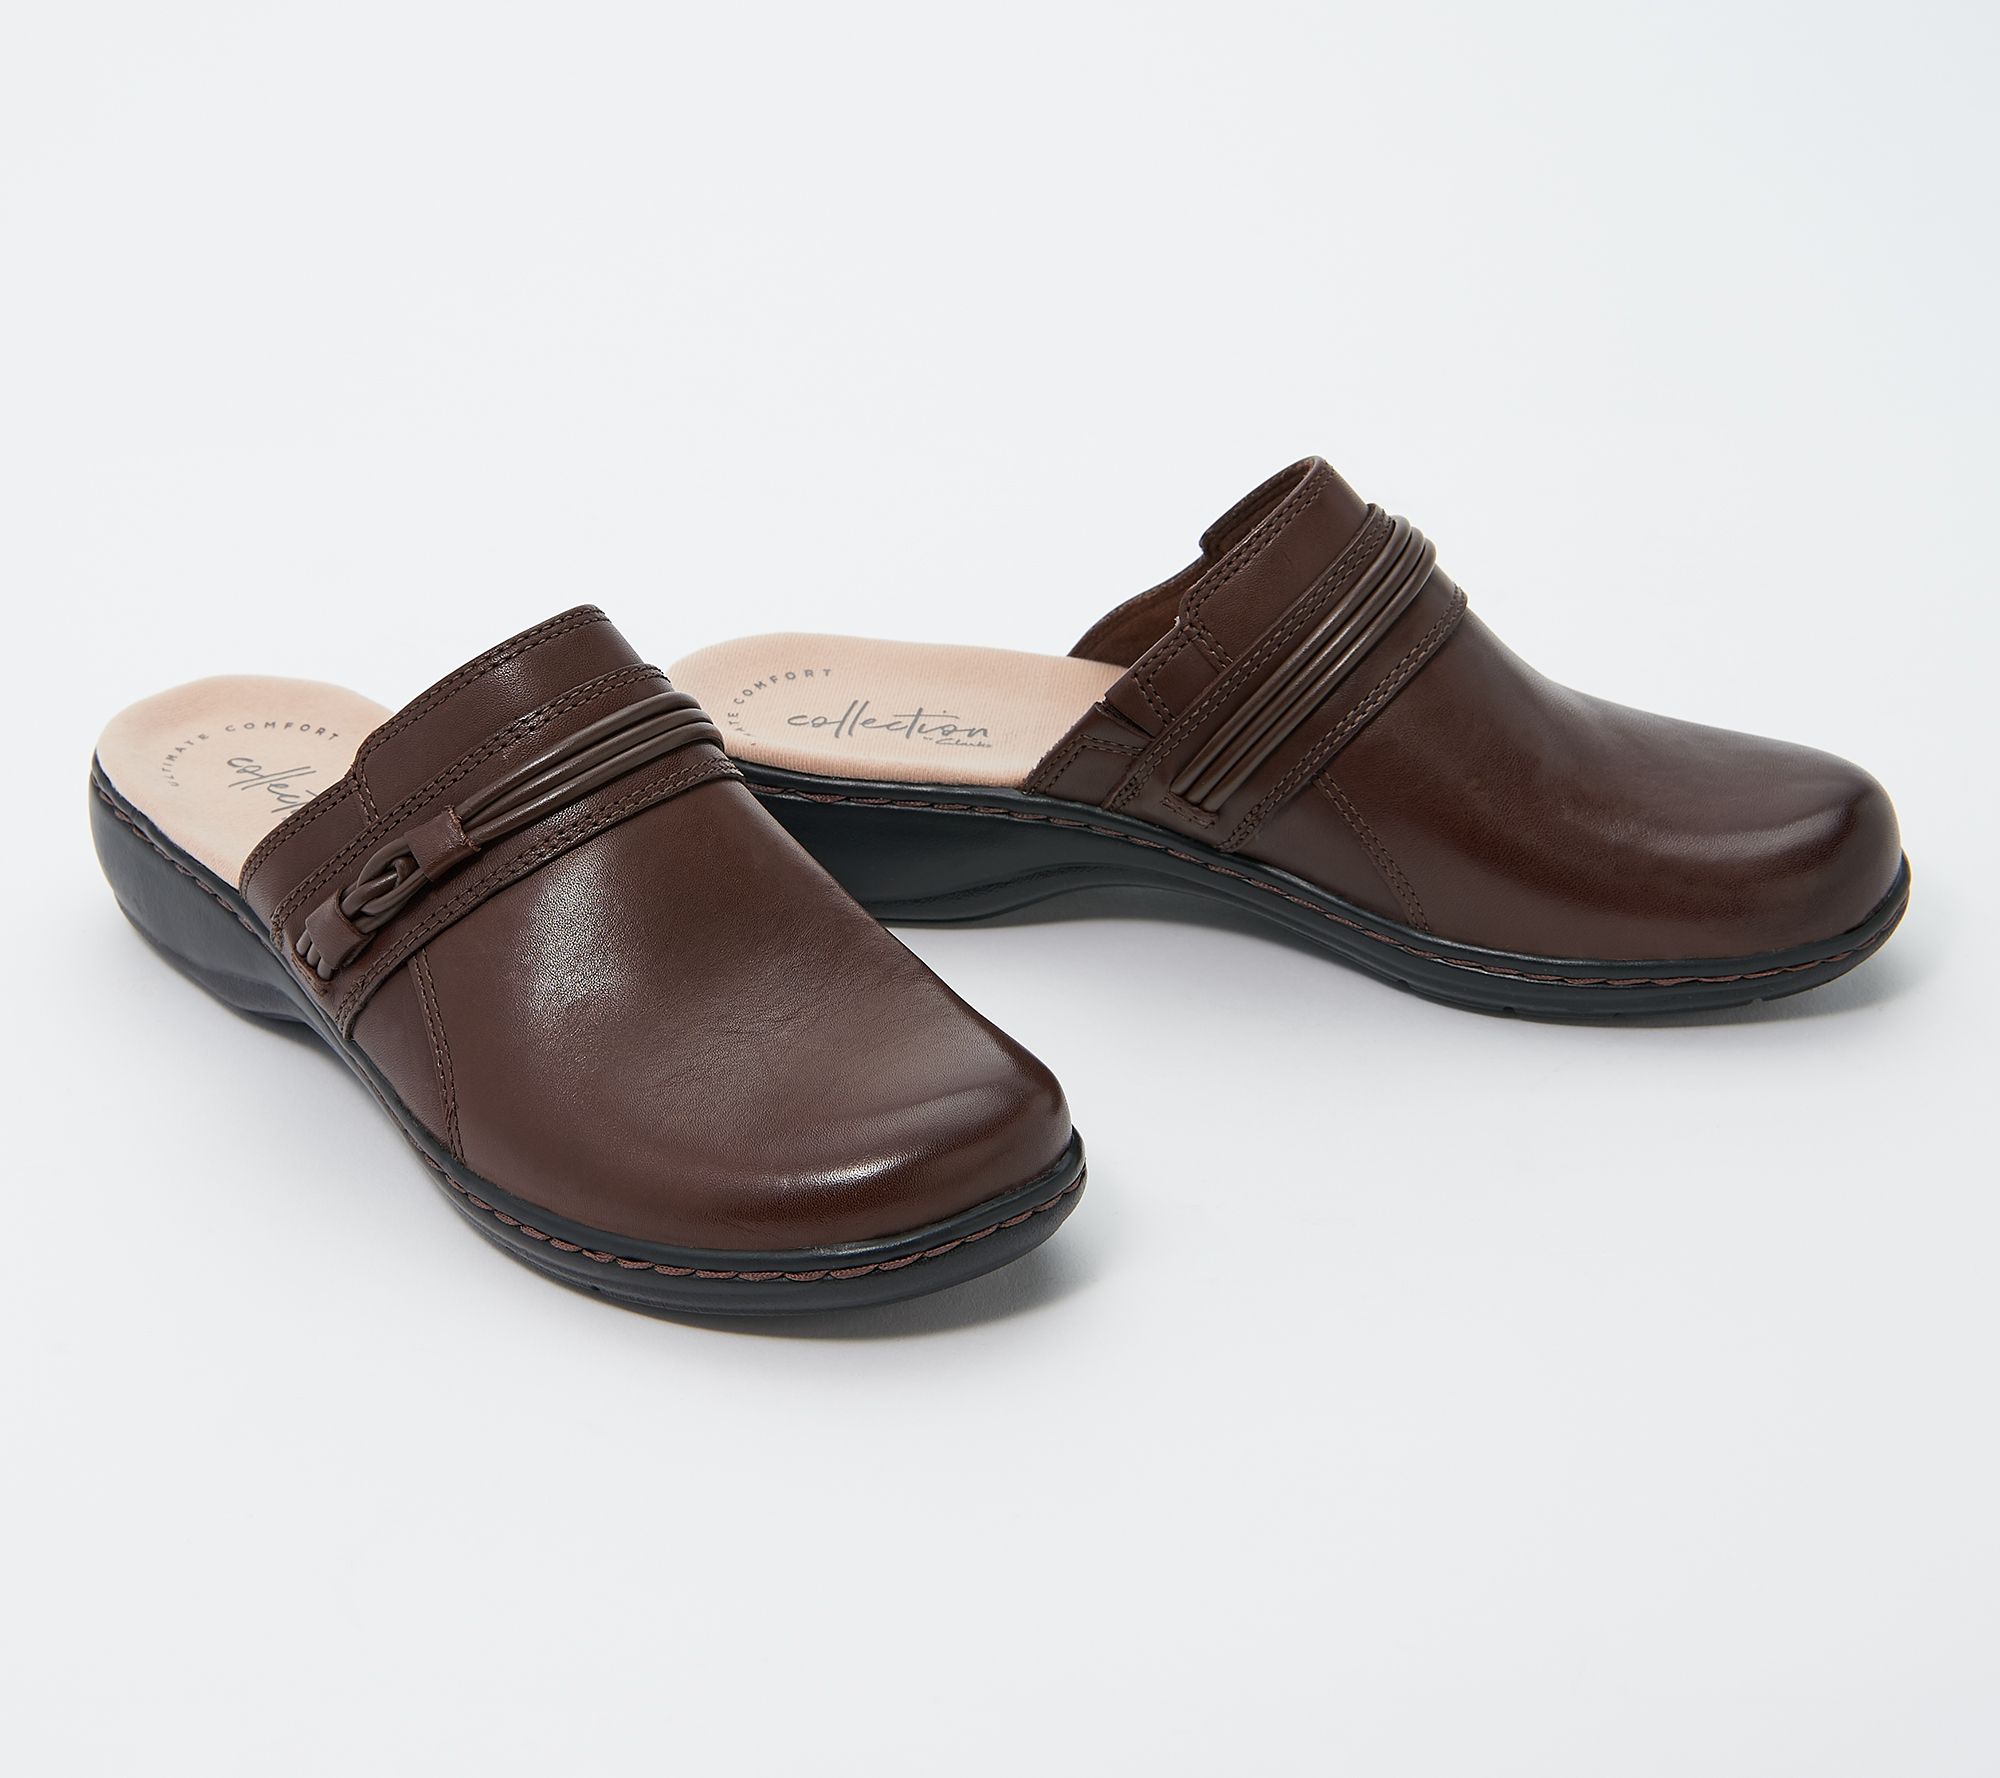 Clarks Collection Leather Clogs - Leisa 